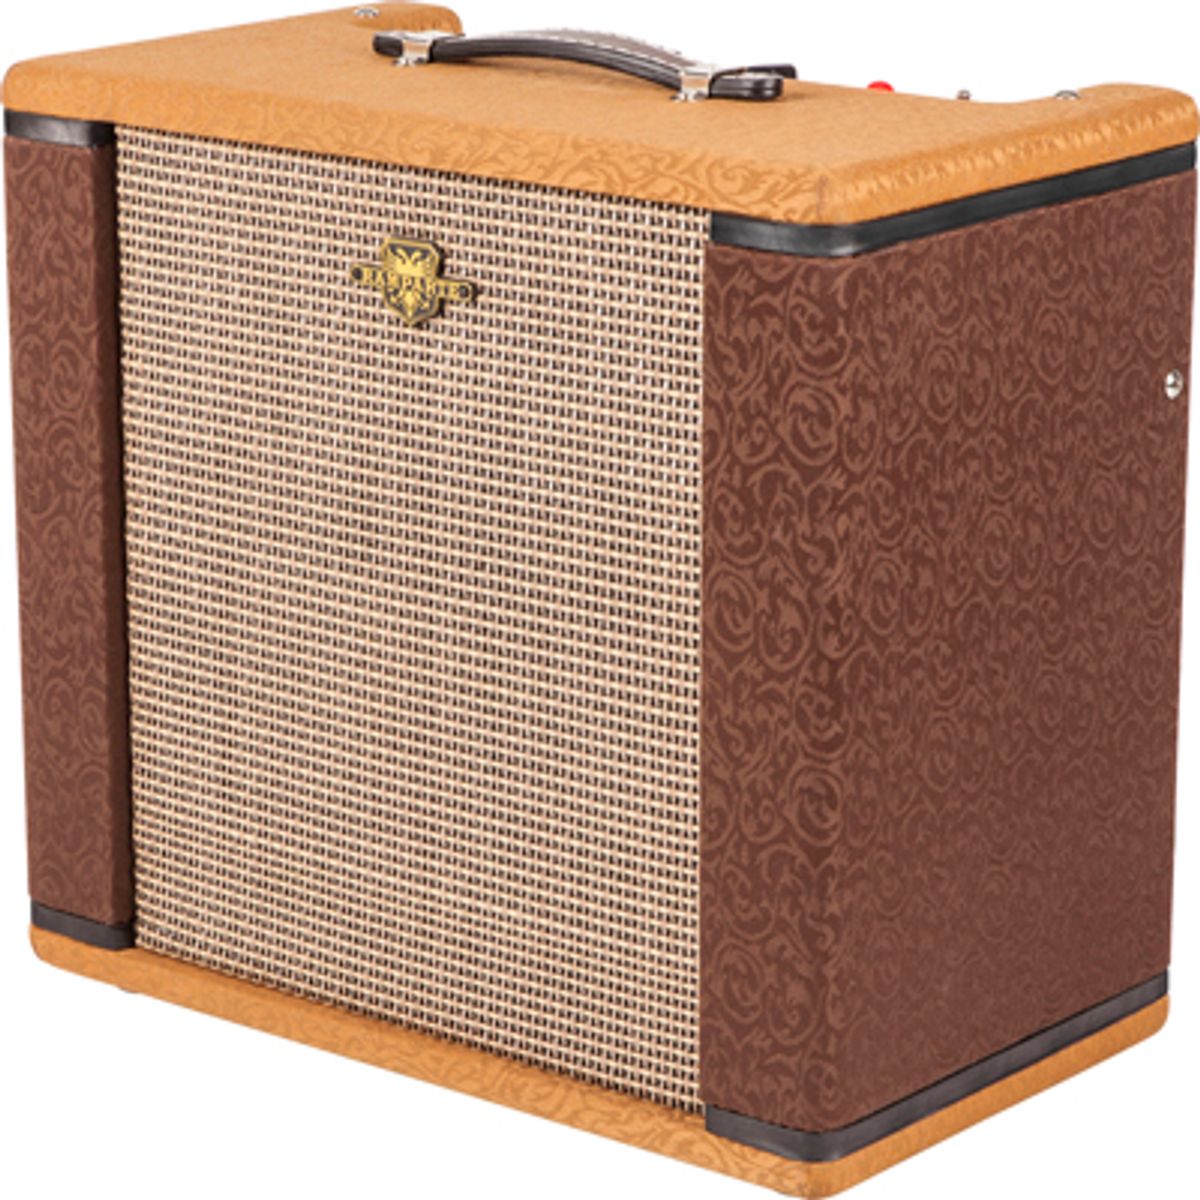 Fender Adds Ramparte to Pawn Shop Special Series of Amps